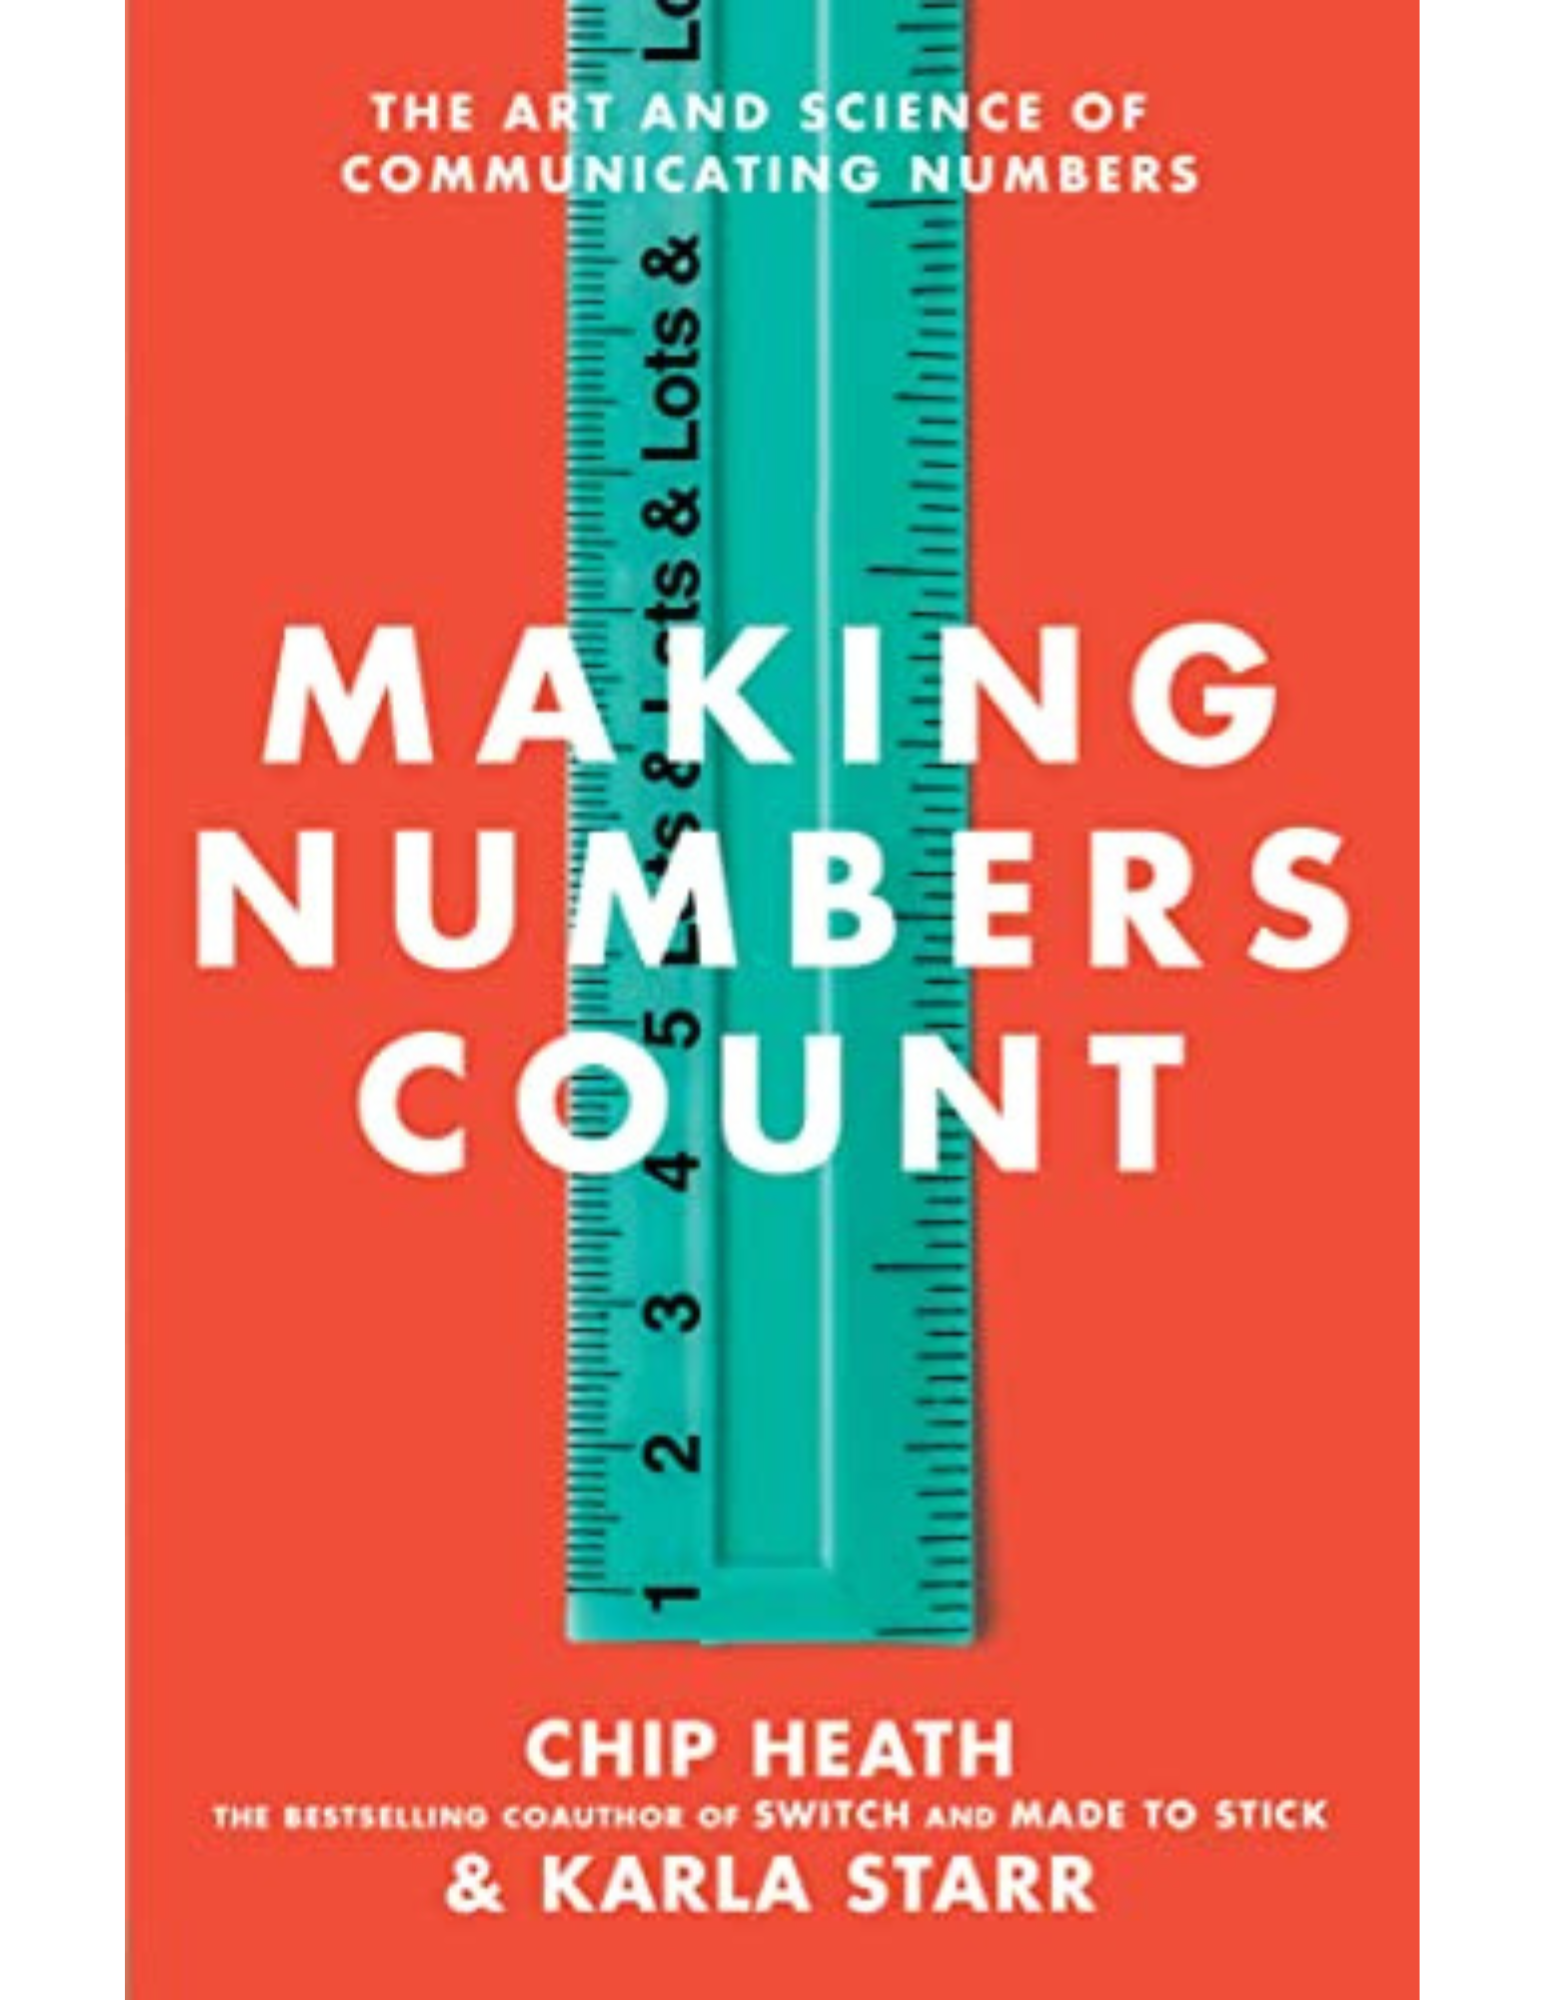 Making Numbers Count by Chip Heath